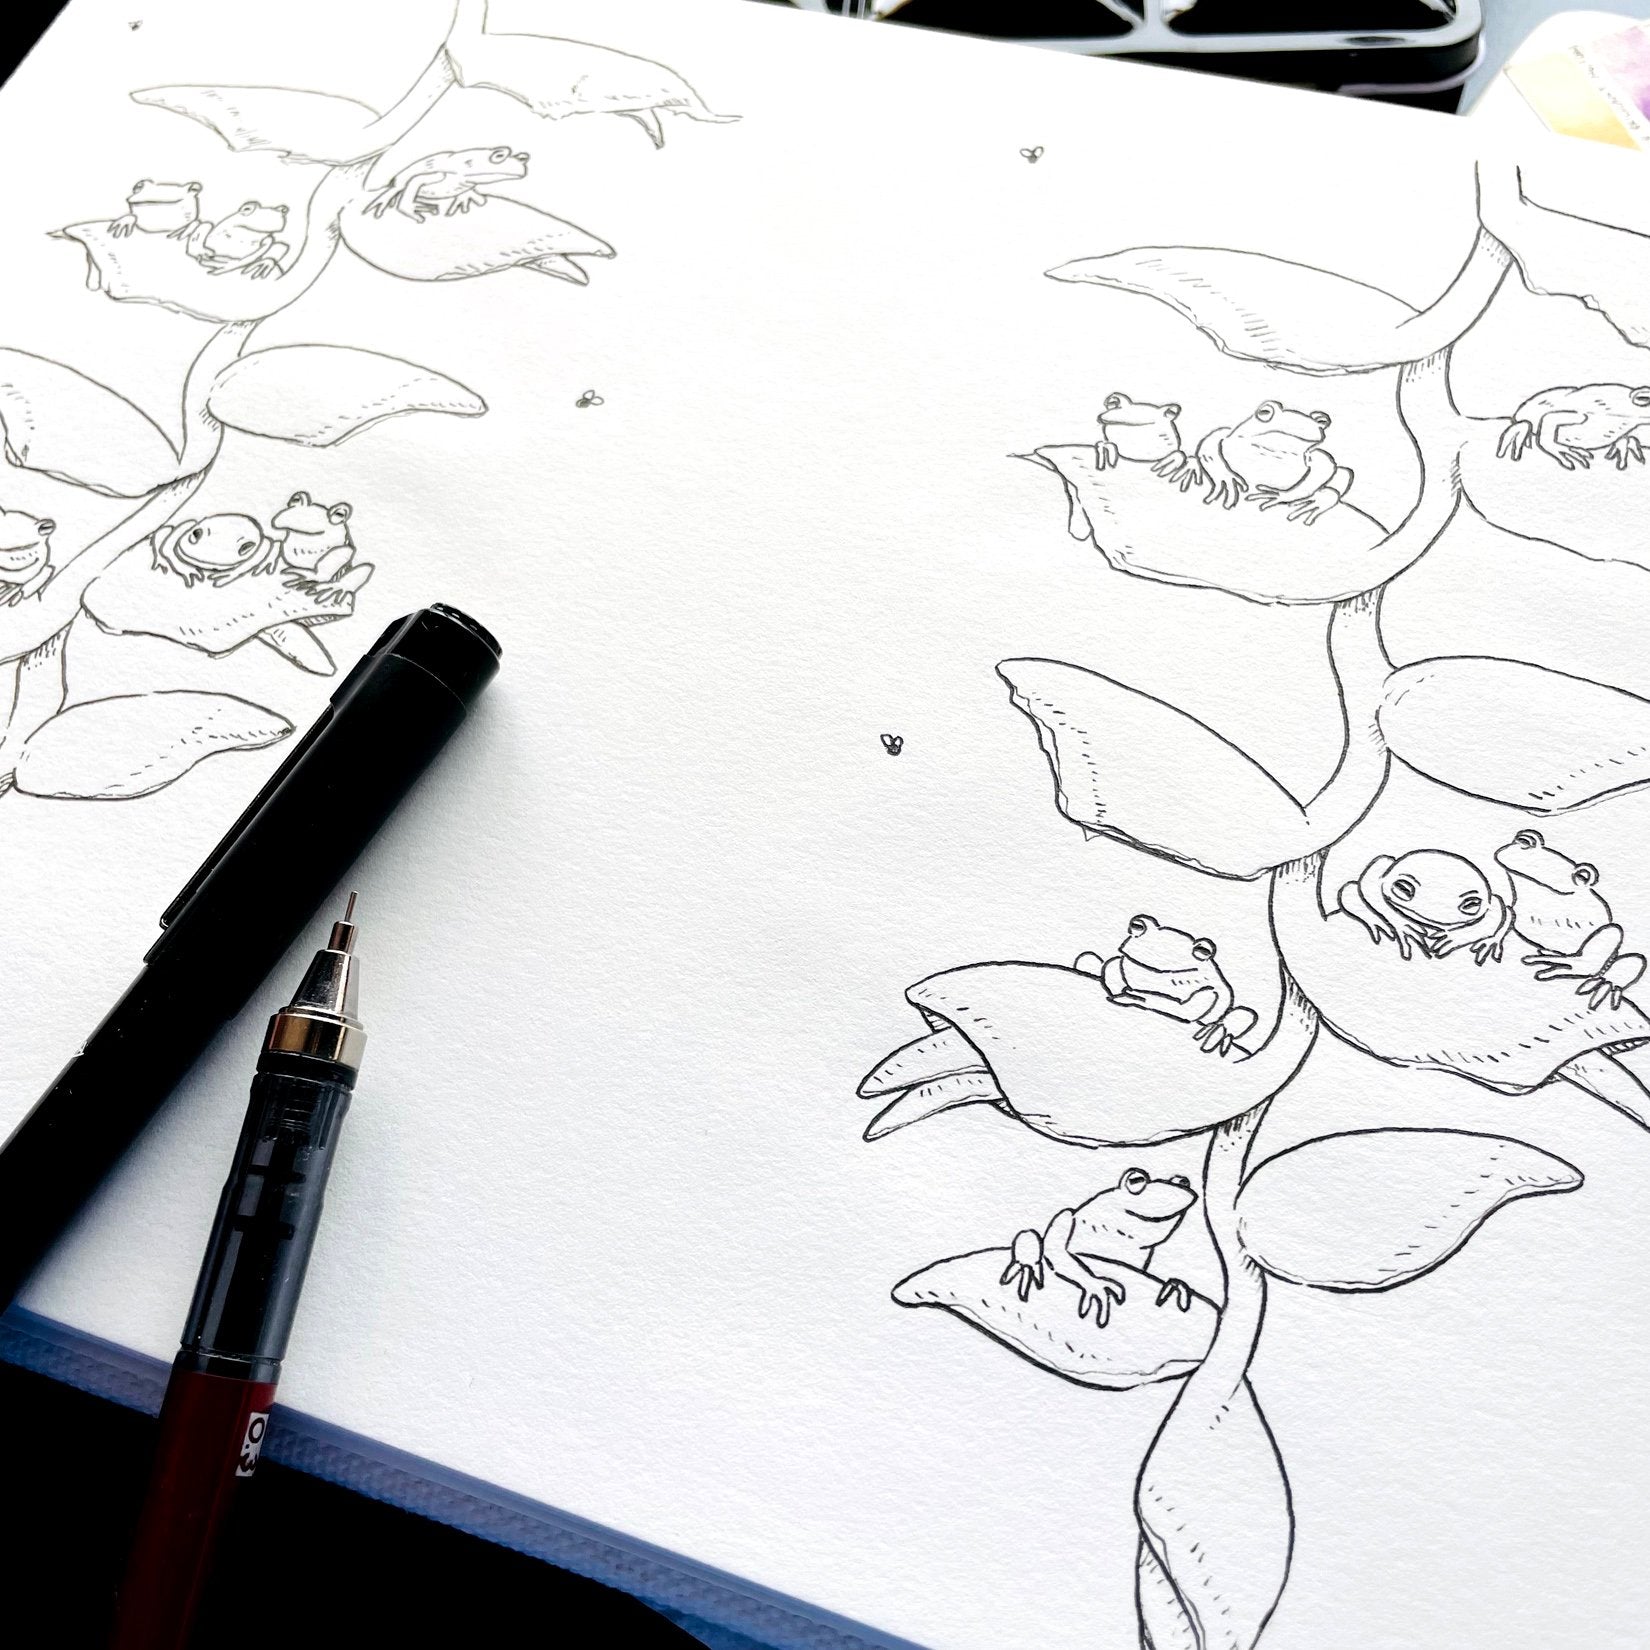 Drawing With Ink: Put Down the Pencil and Try the Pen